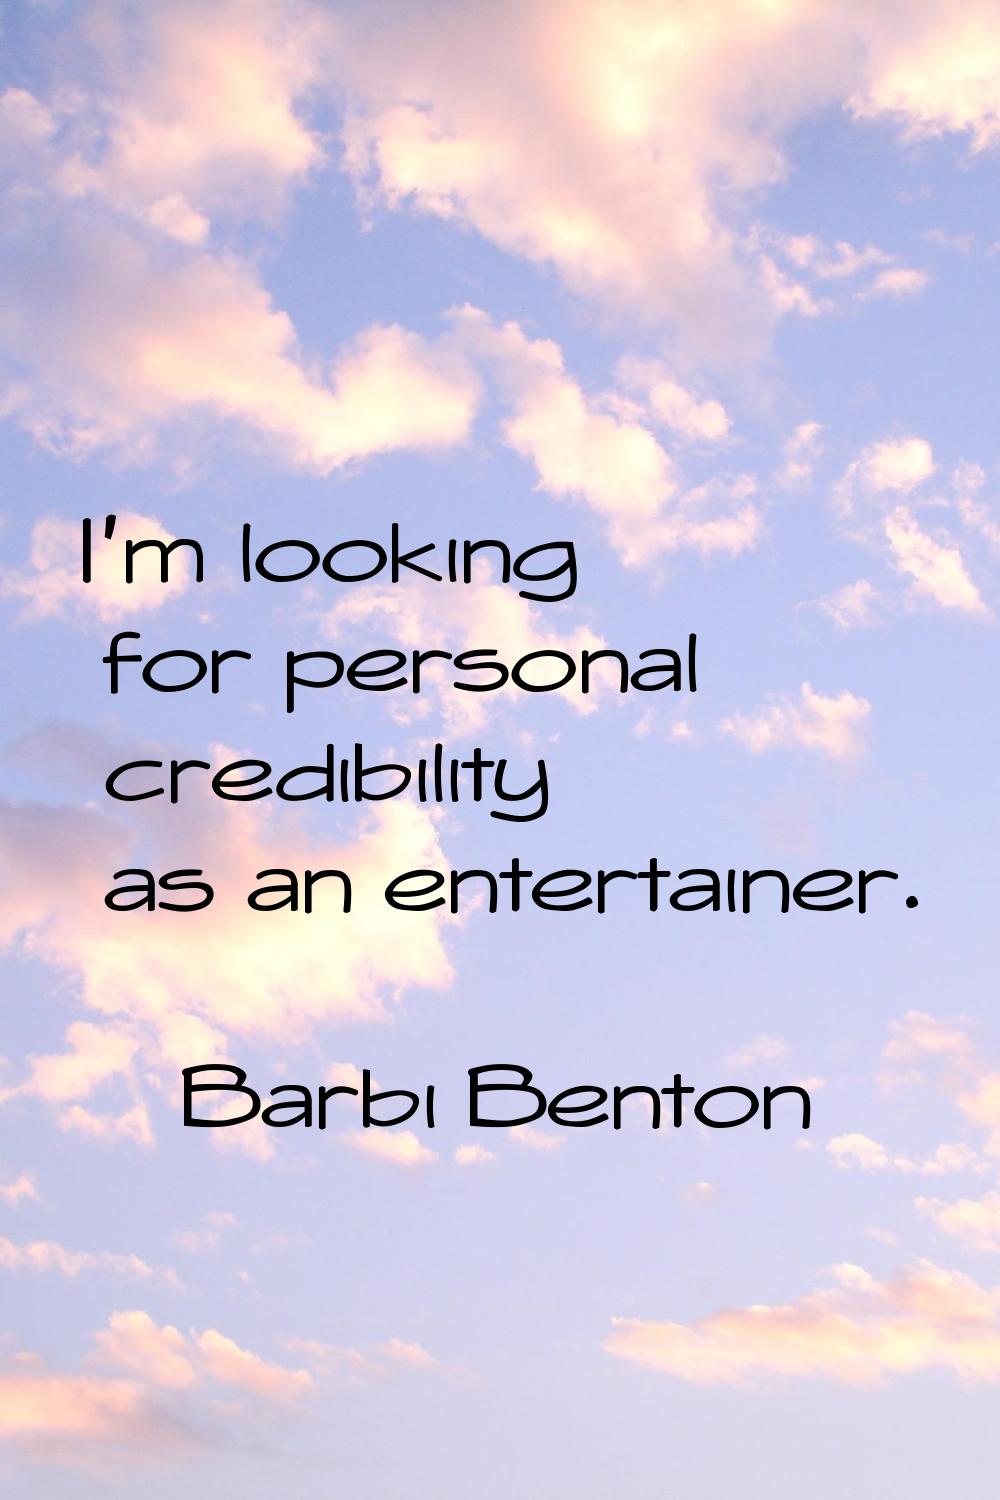 I'm looking for personal credibility as an entertainer.